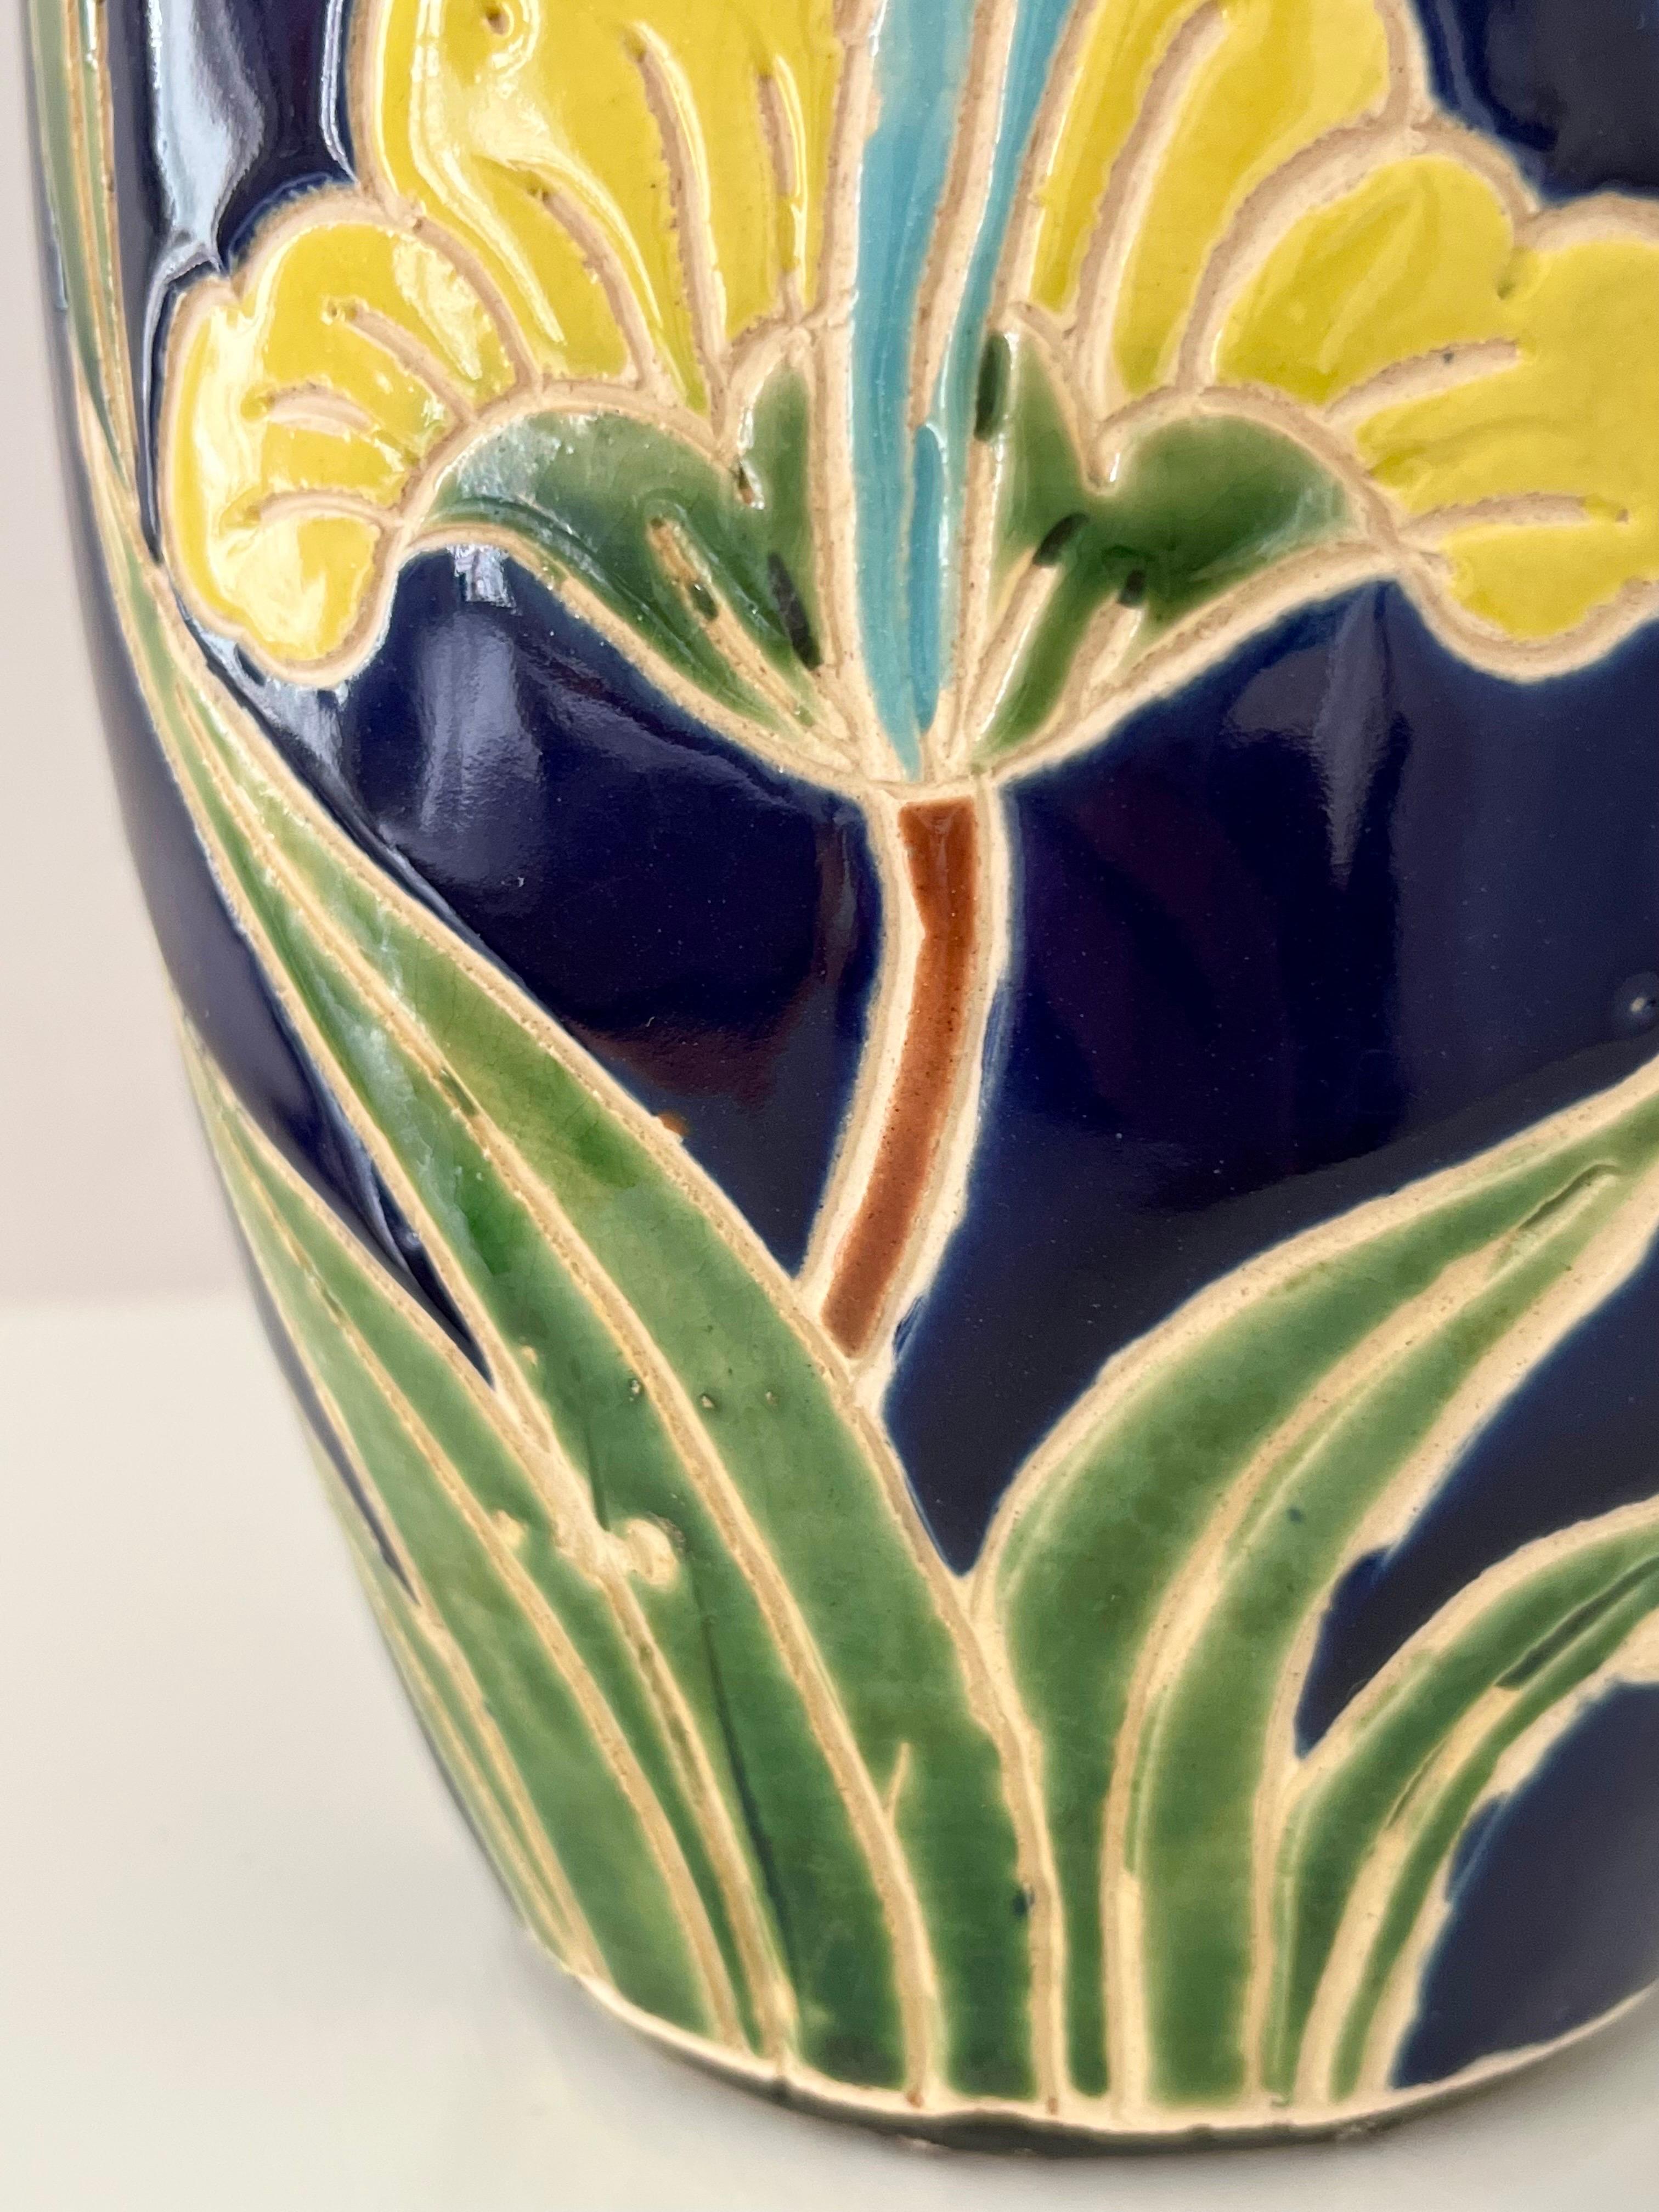 1960s/1970s Scandinavian Organic Modern Ceramic Vase with Colorful Floral Motifs For Sale 8